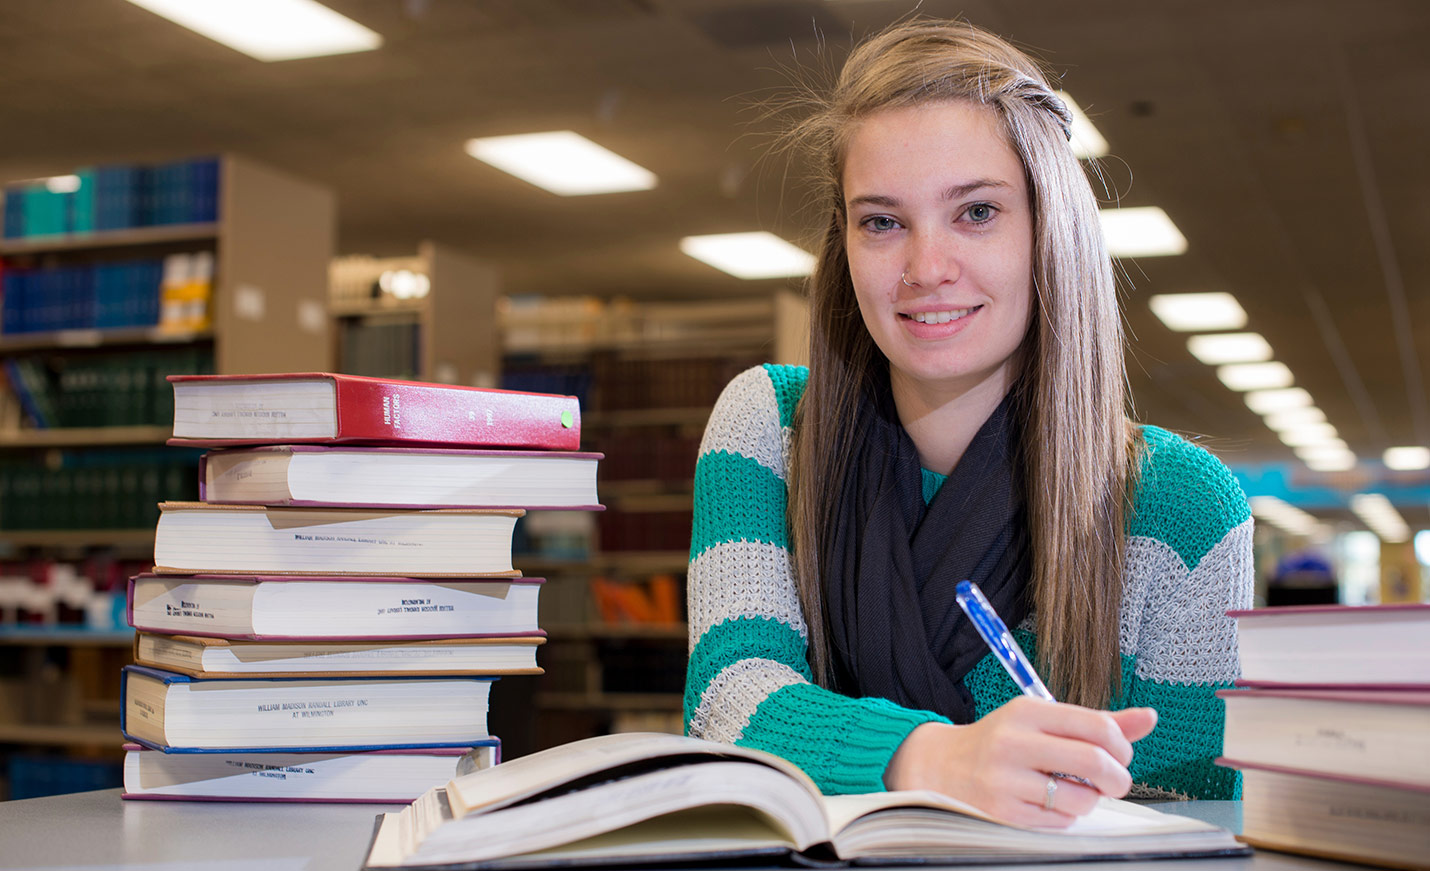 A student holding a pen sits at a table next to a stack of books